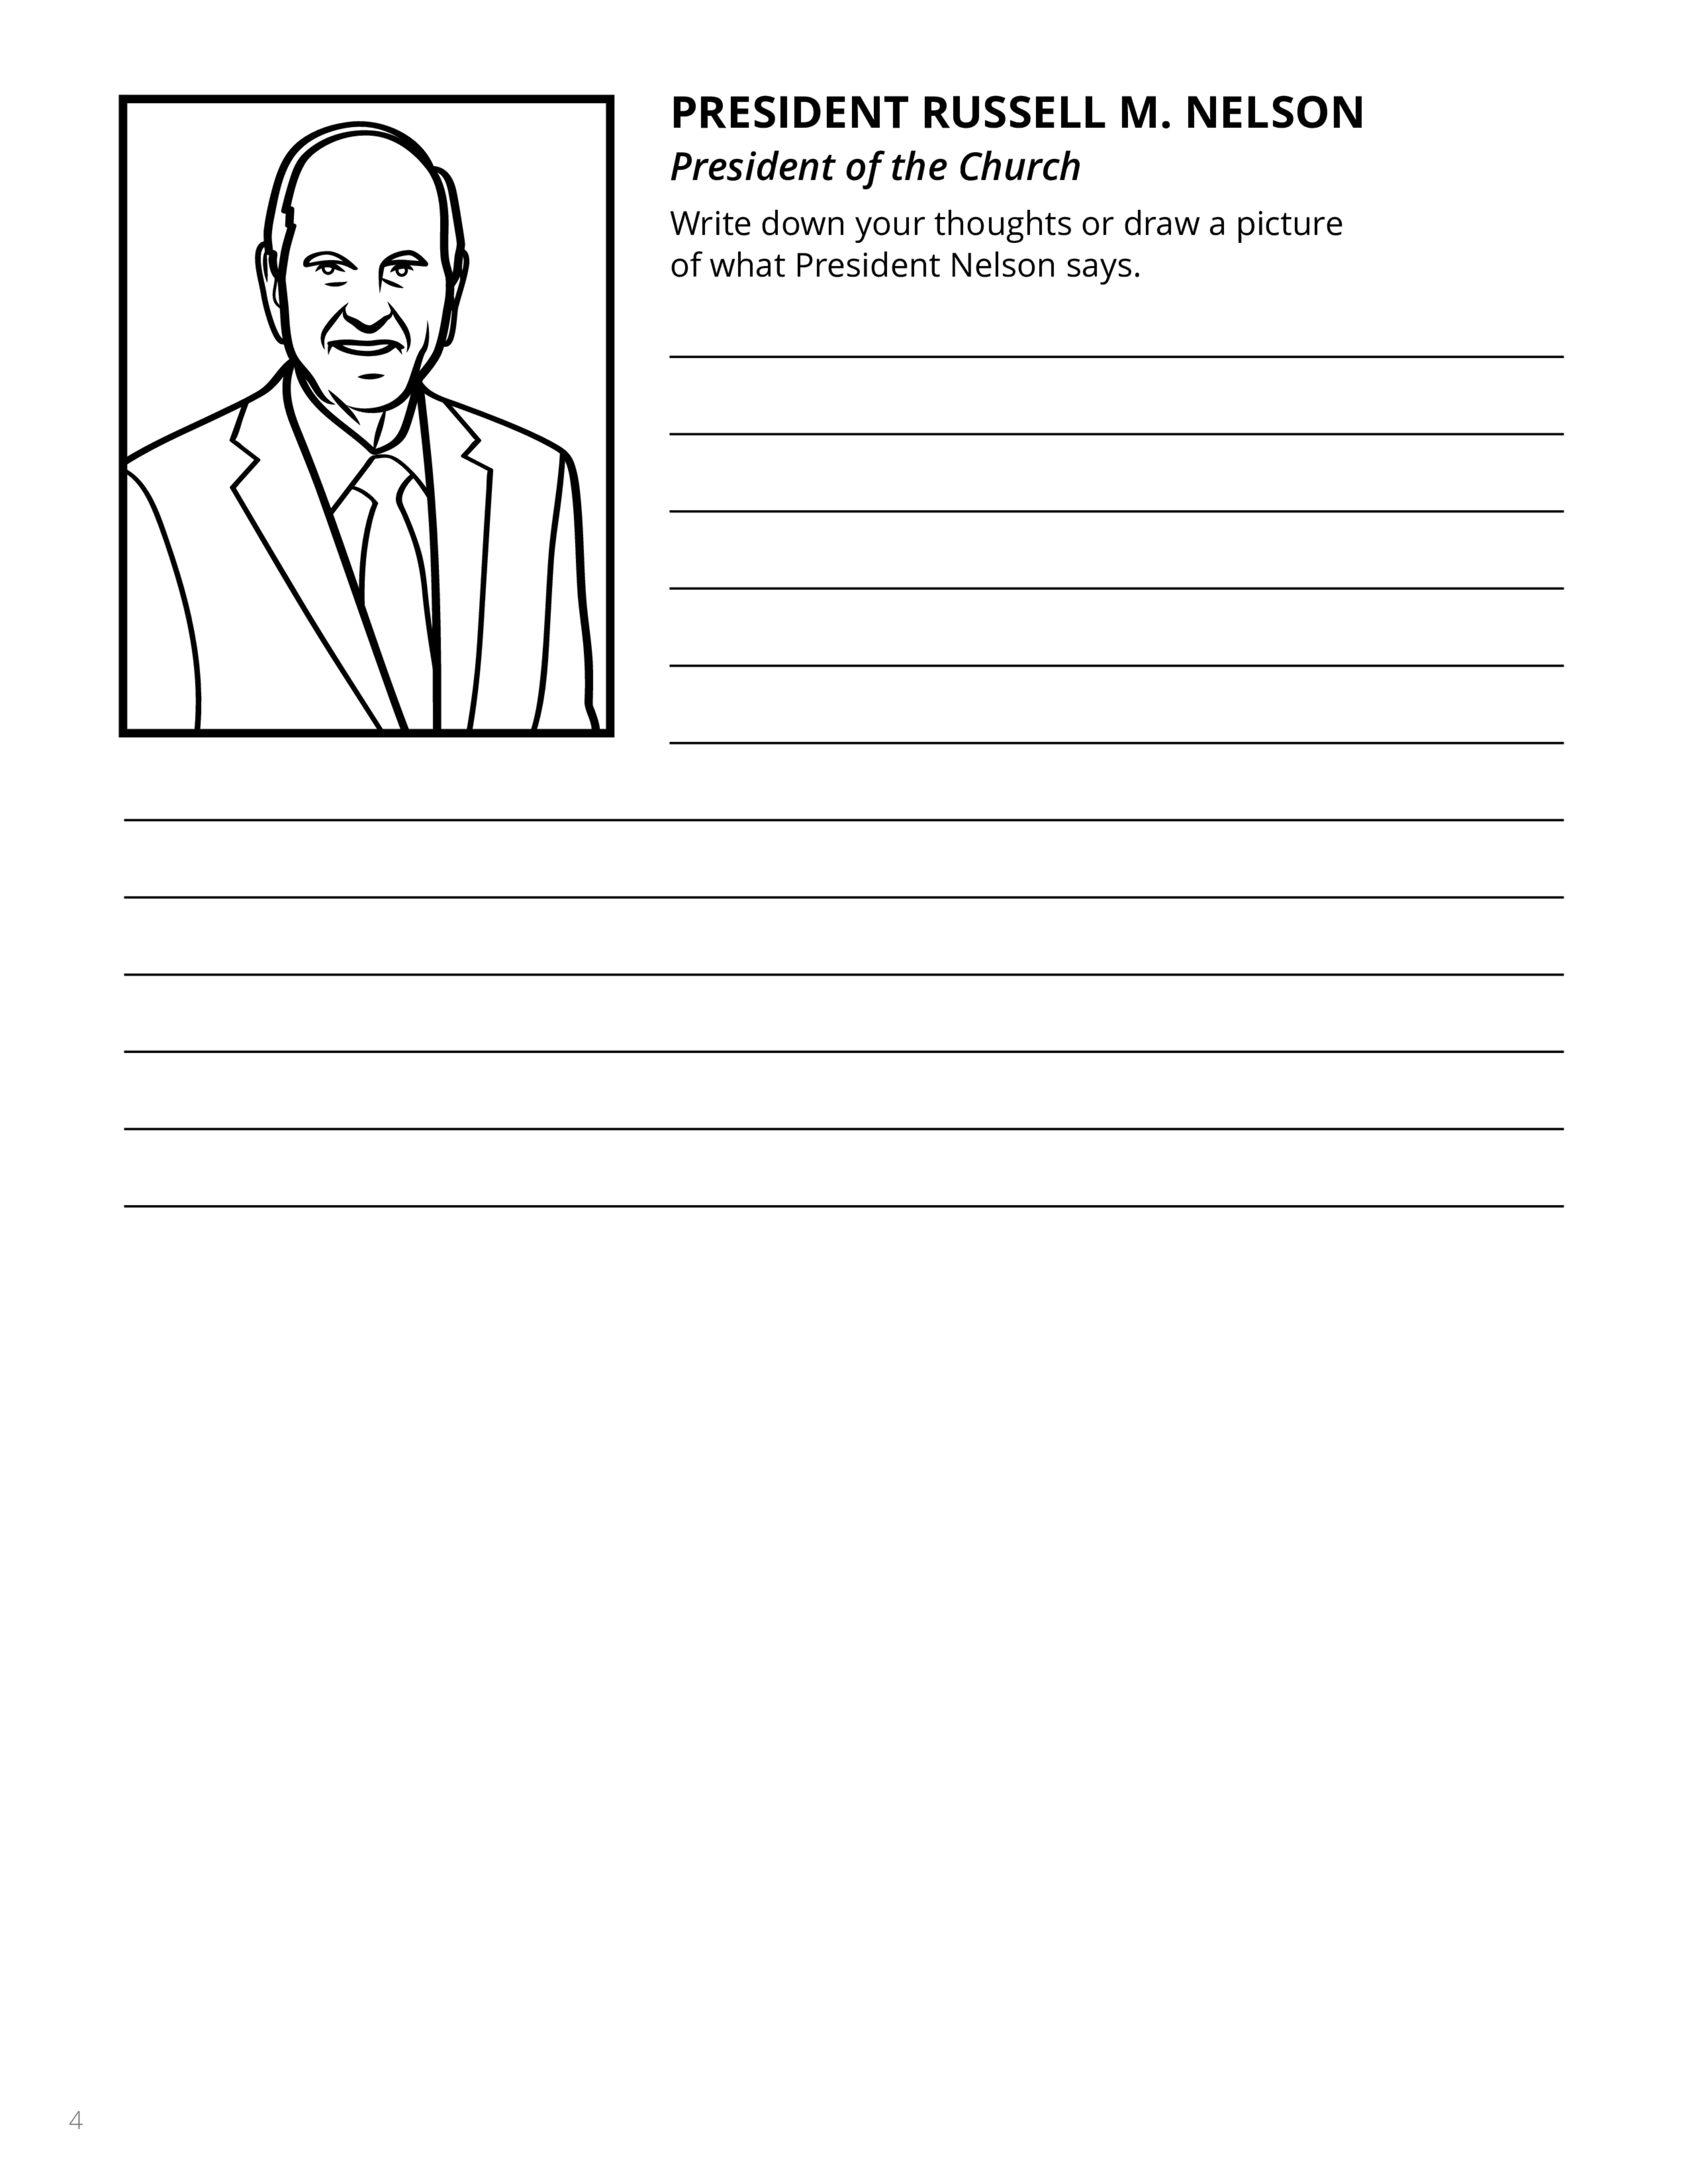 An activity page to encourage children to listen and write down thoughts or draw a picture of what Russell M. Nelson says.